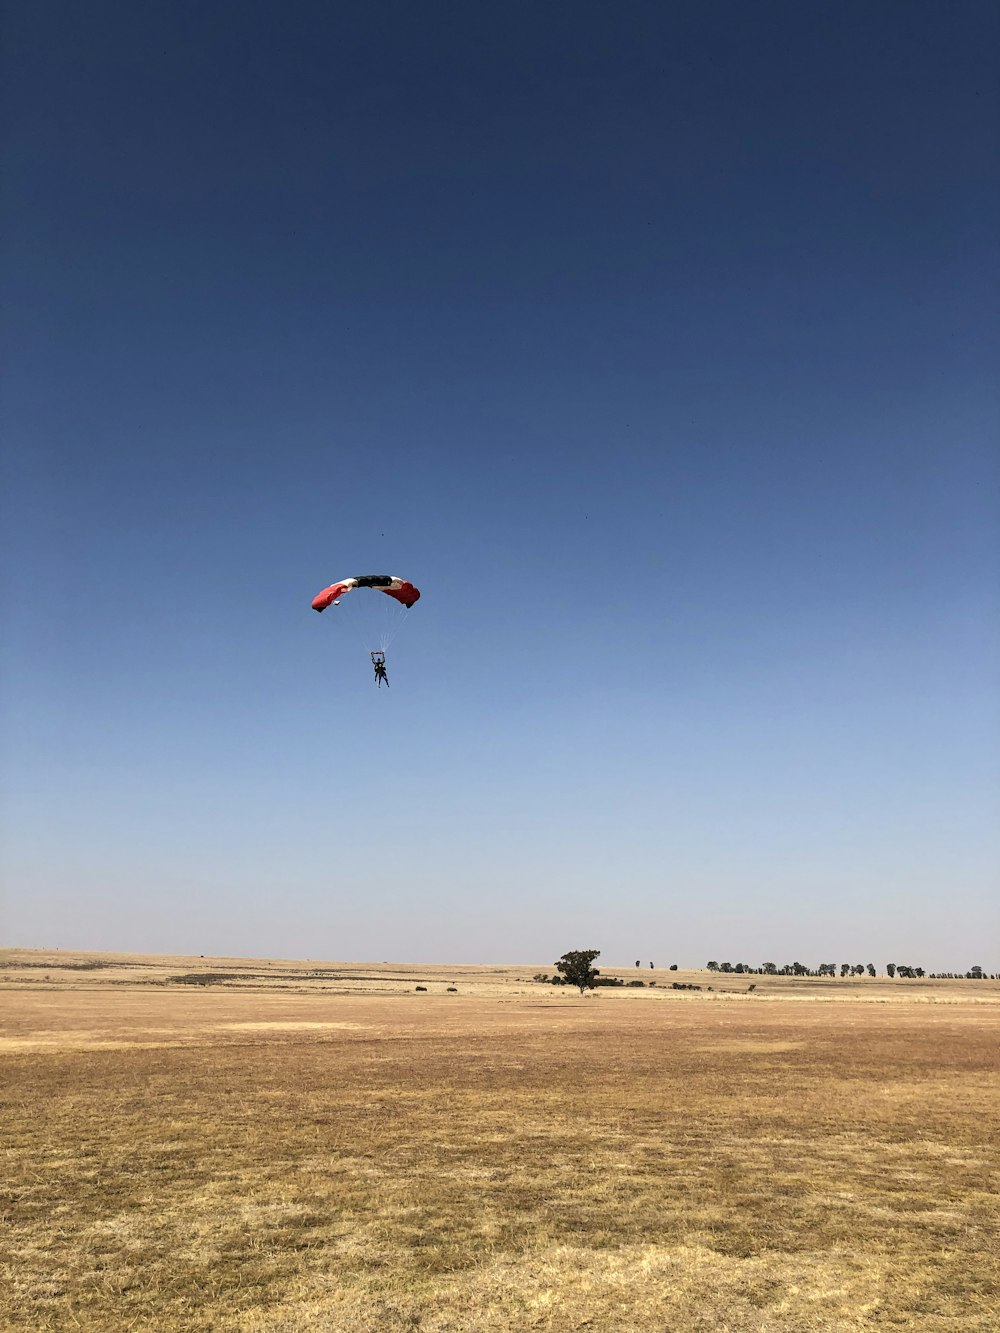 man riding on red and black parachute